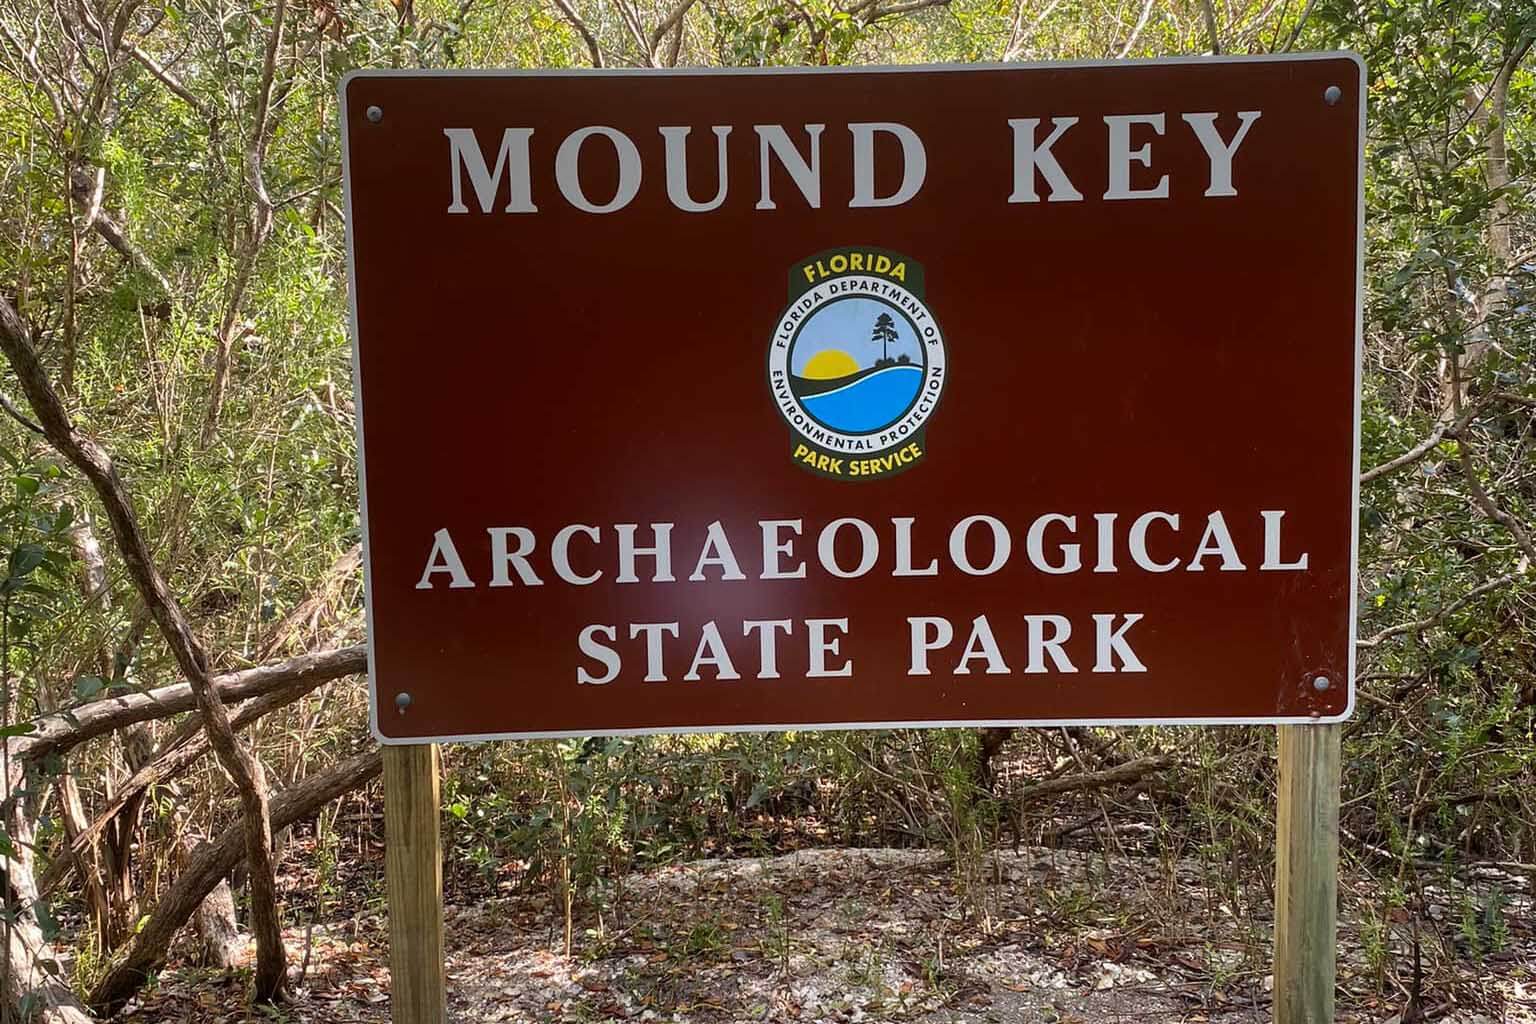 Mound Key Archaeological State Park Sign